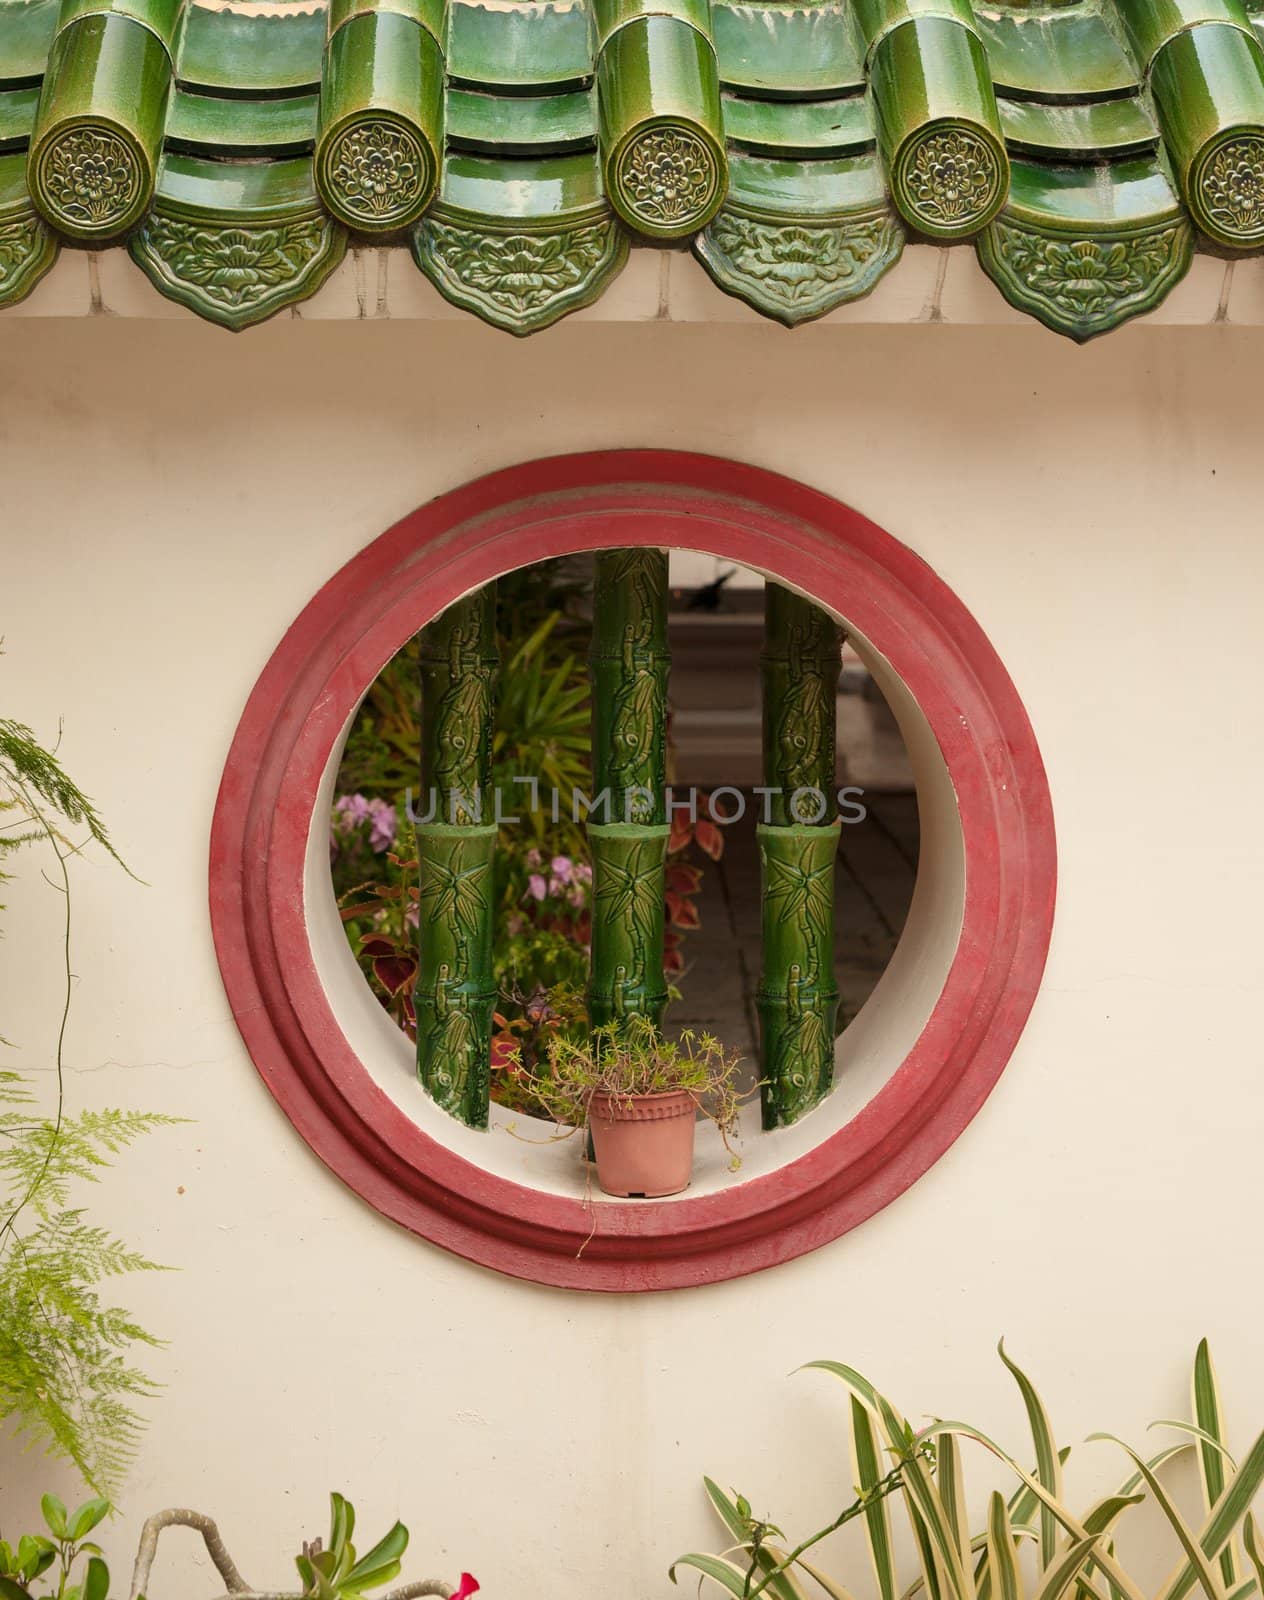 a round barred window in wall background